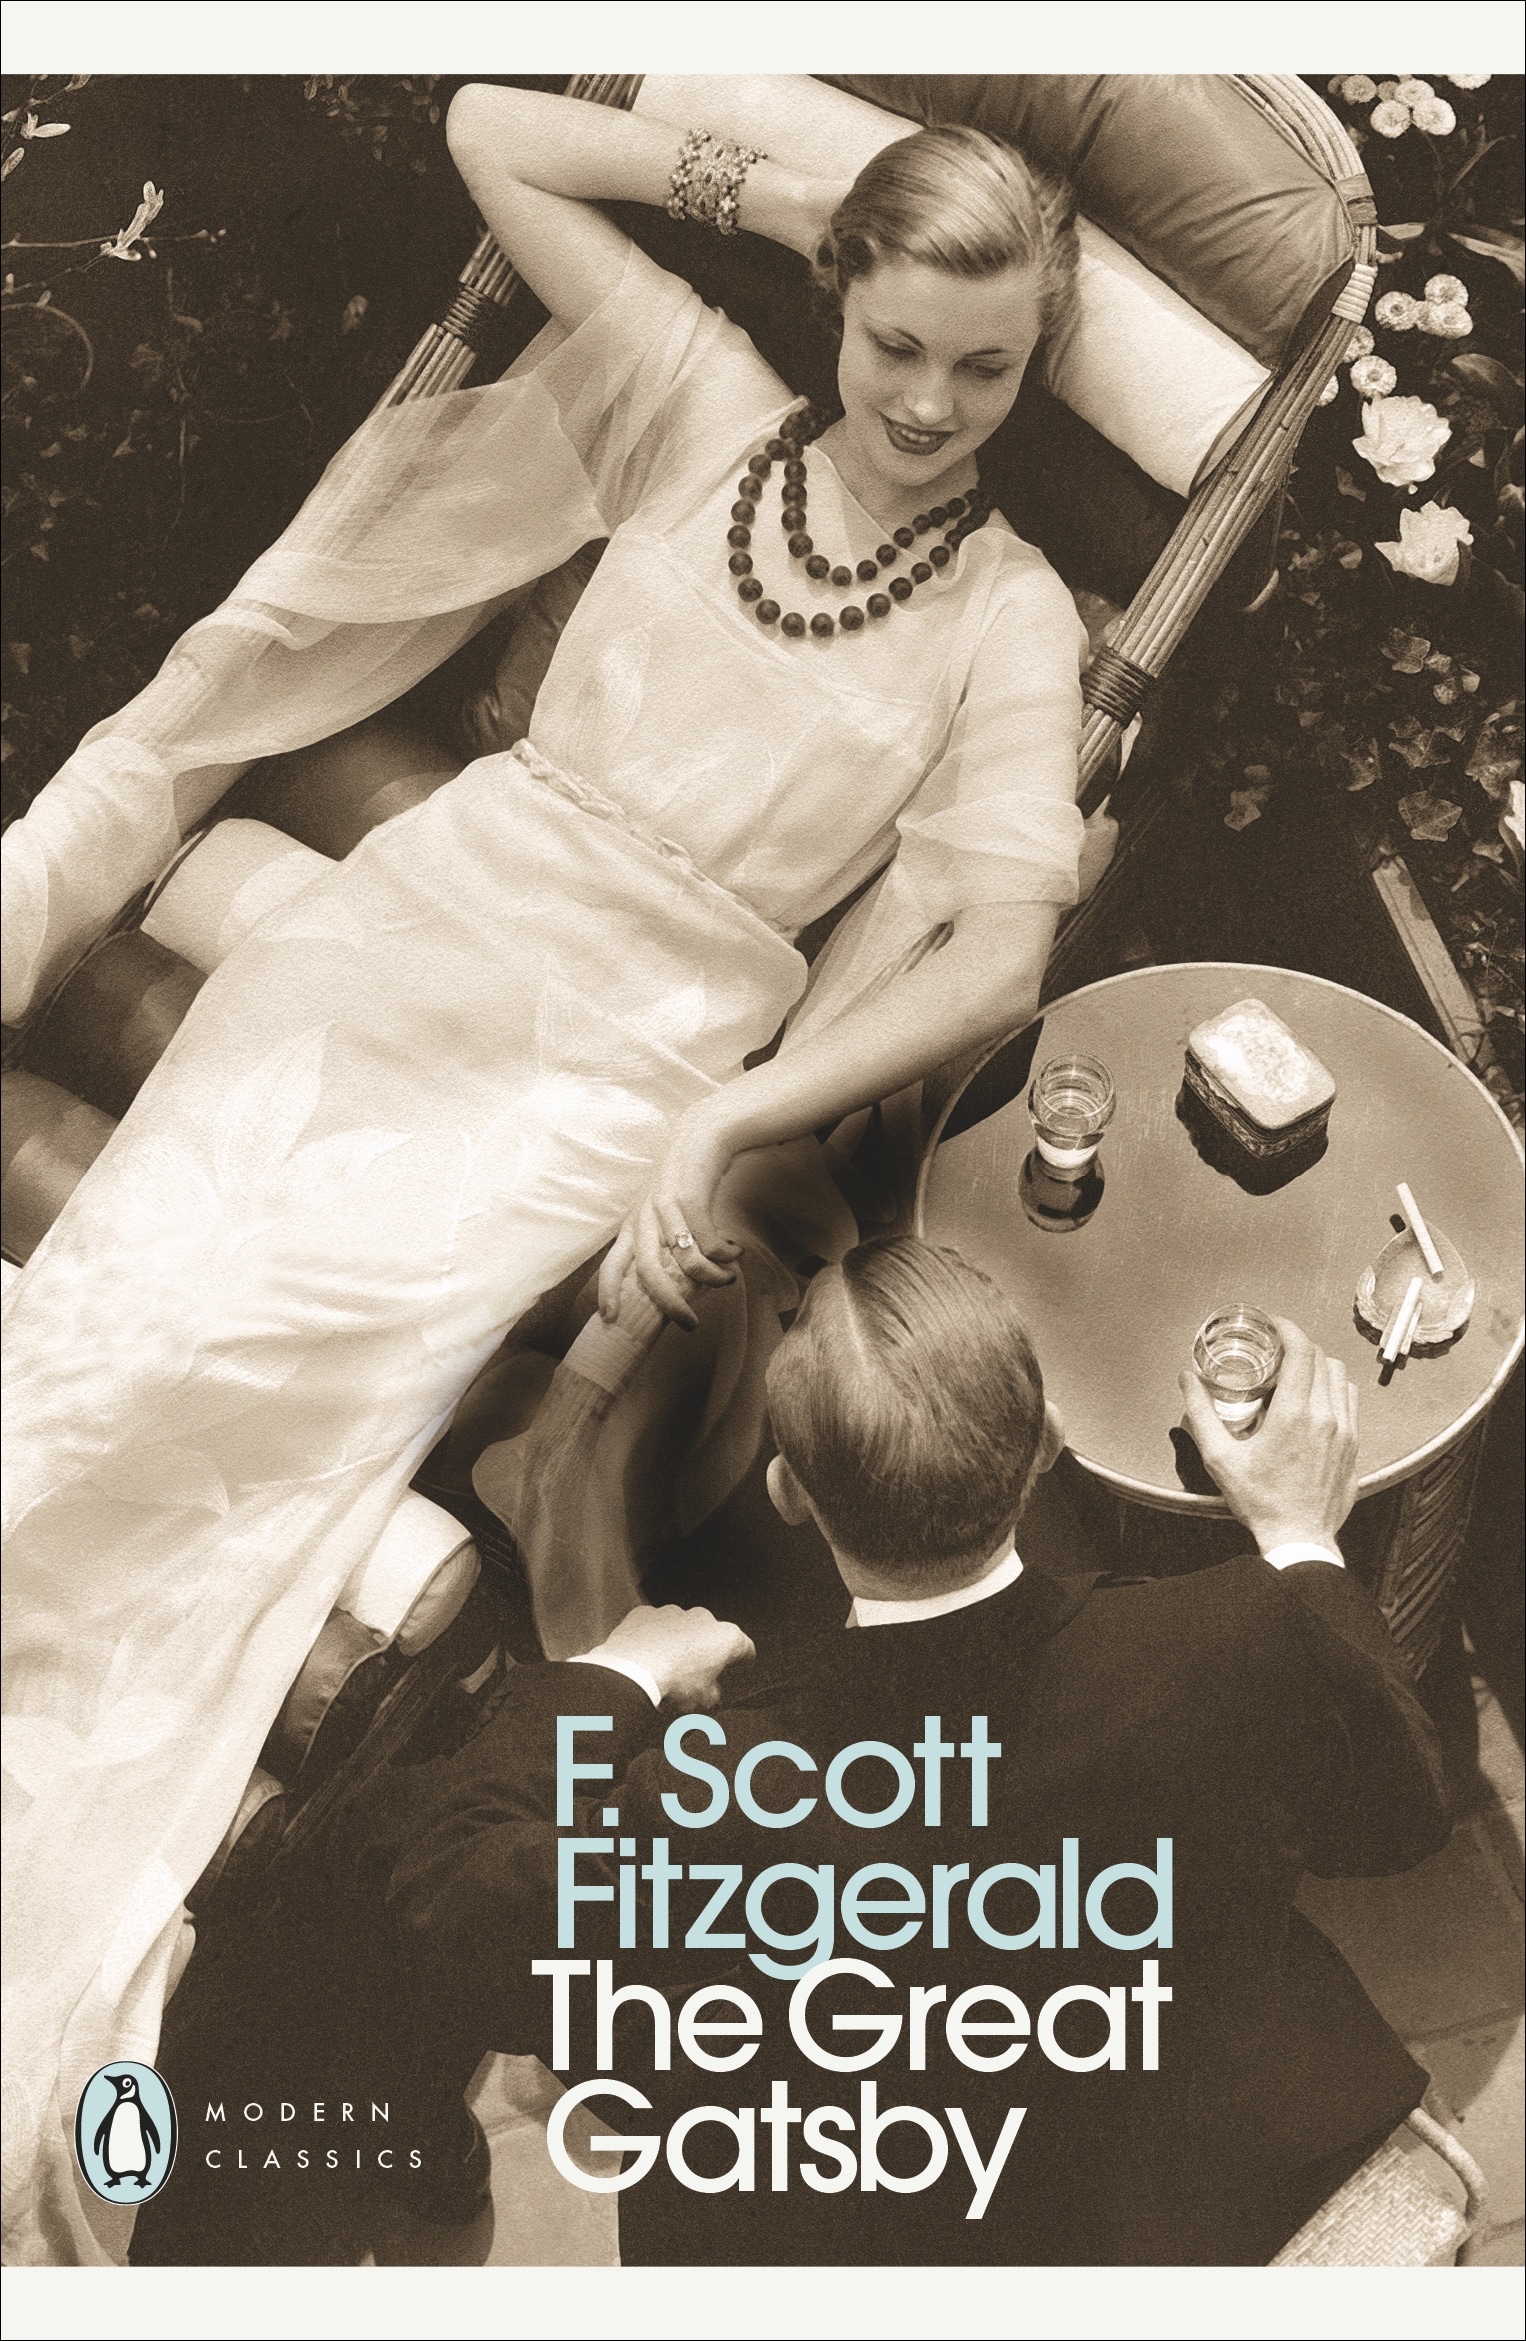 Book “The Great Gatsby” by F. Scott Fitzgerald, Tony Tanner — February 24, 2000